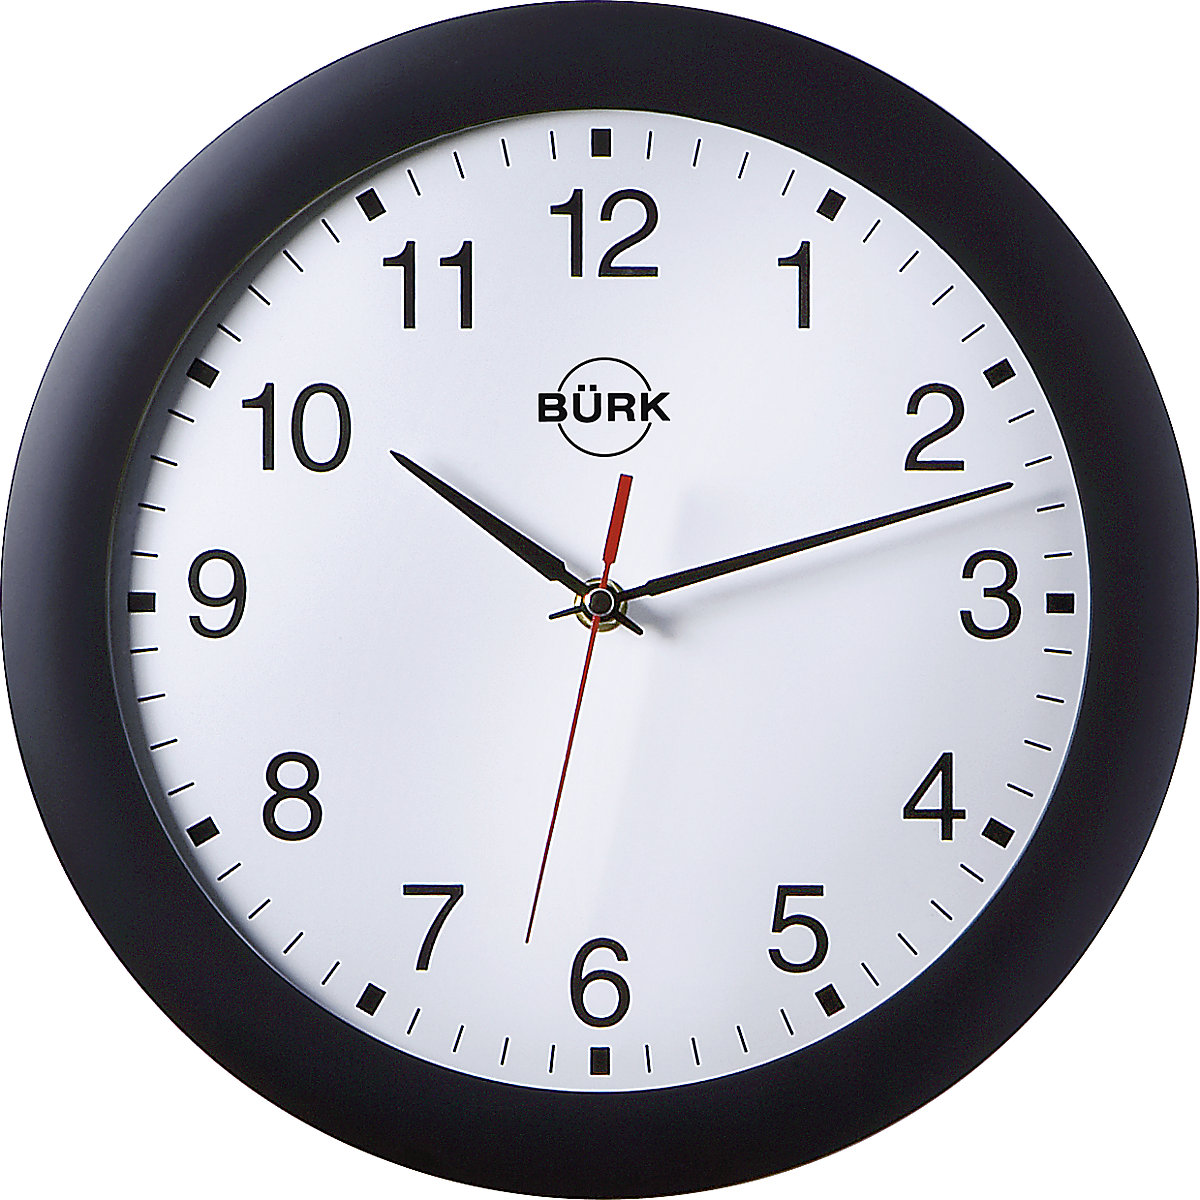 Wall clock made of ABS plastic, Ø 300 mm, radio synchronised clock, black housing, white clock face-2